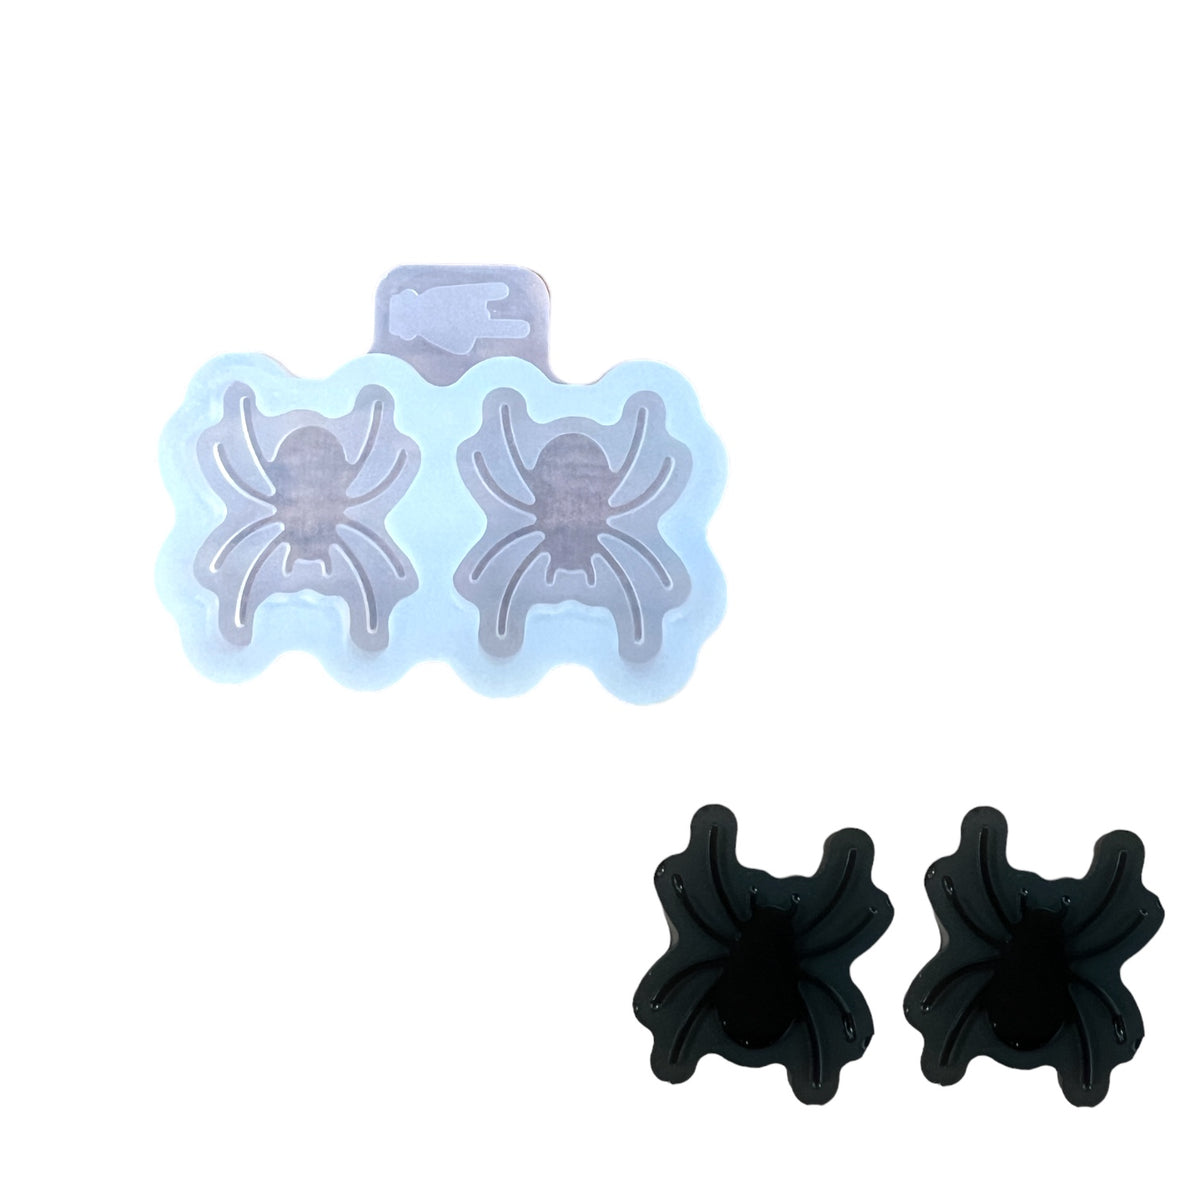 Tiny Spider Halloween Resin Rockers Exclusive Stud Earring Mold for UV and Epoxy Resin